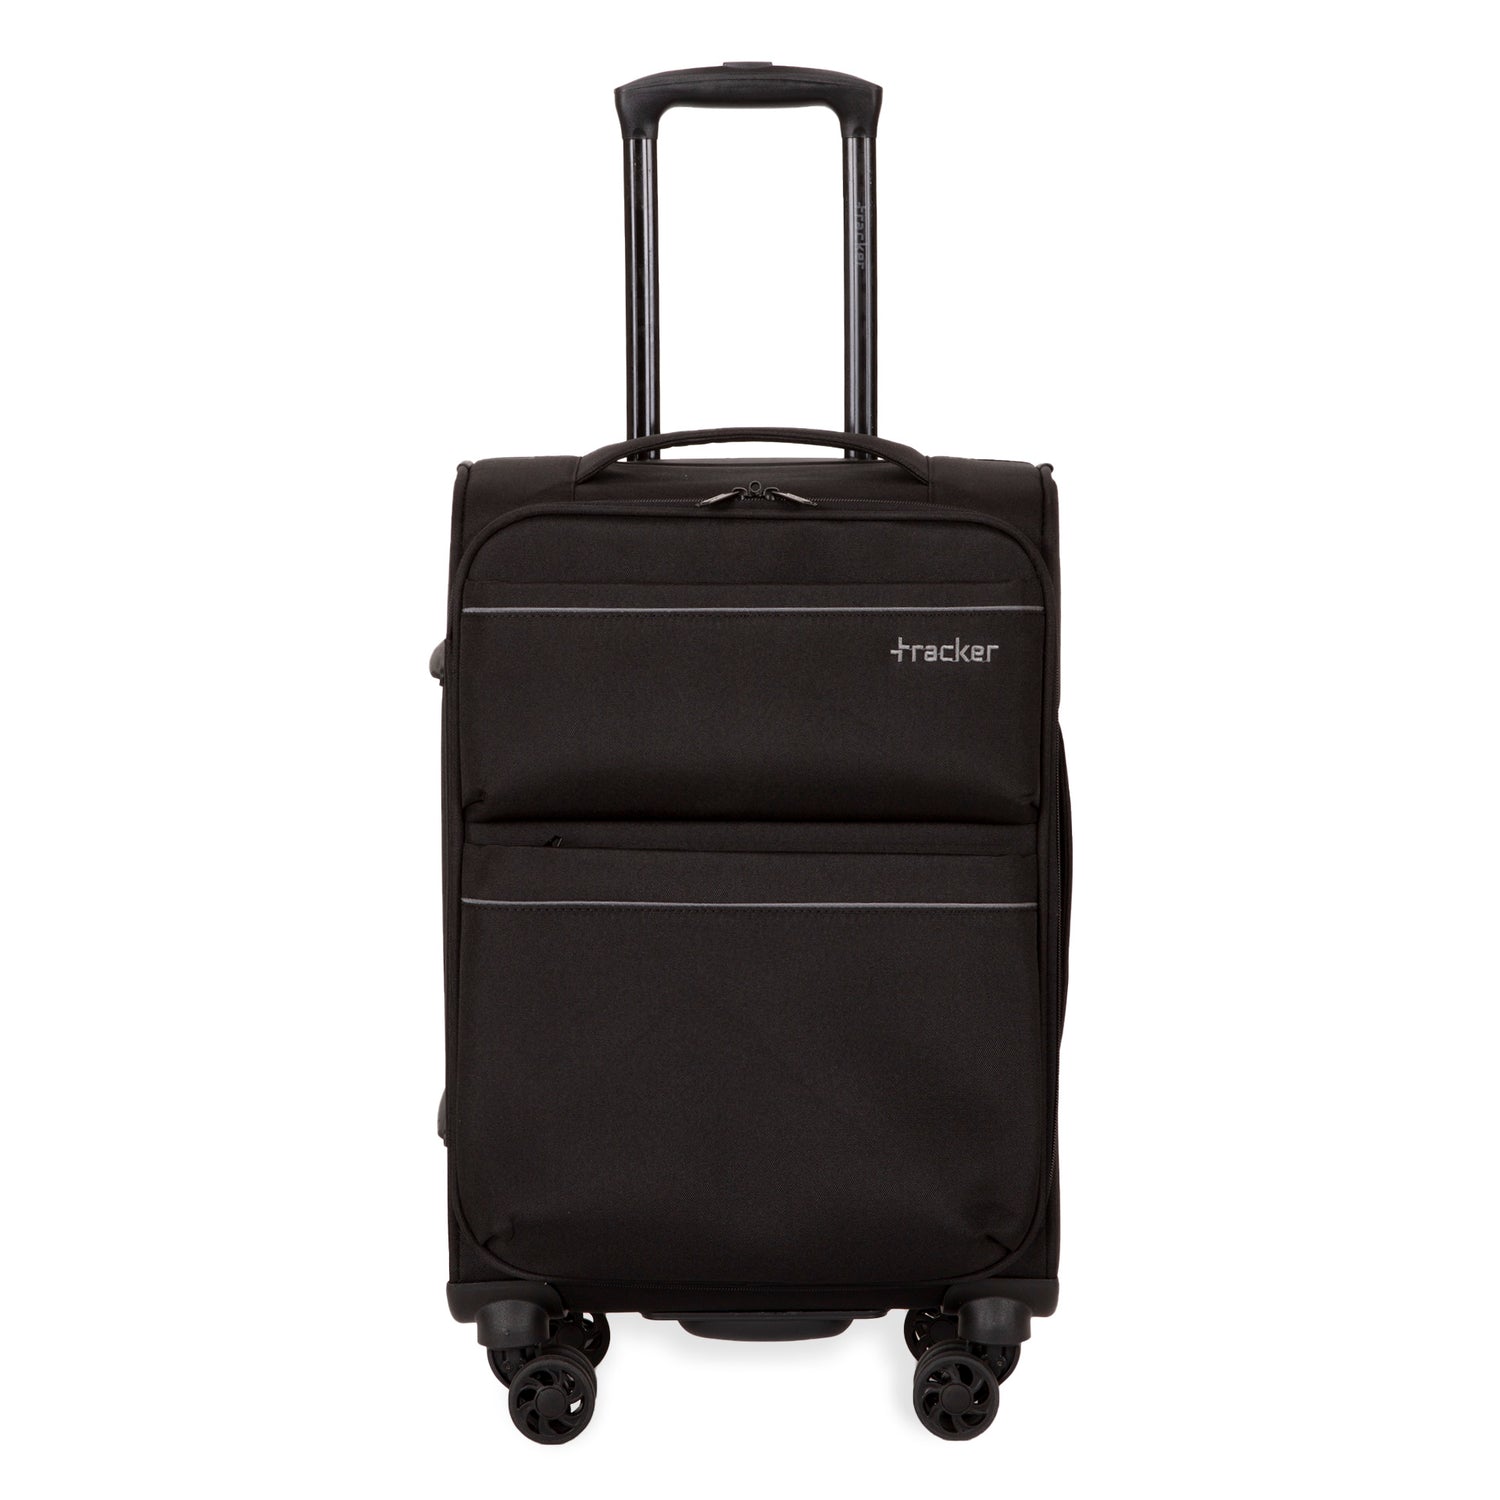 Expedition 4.0 Softside 21.5" Carry-On Luggage - Bentley